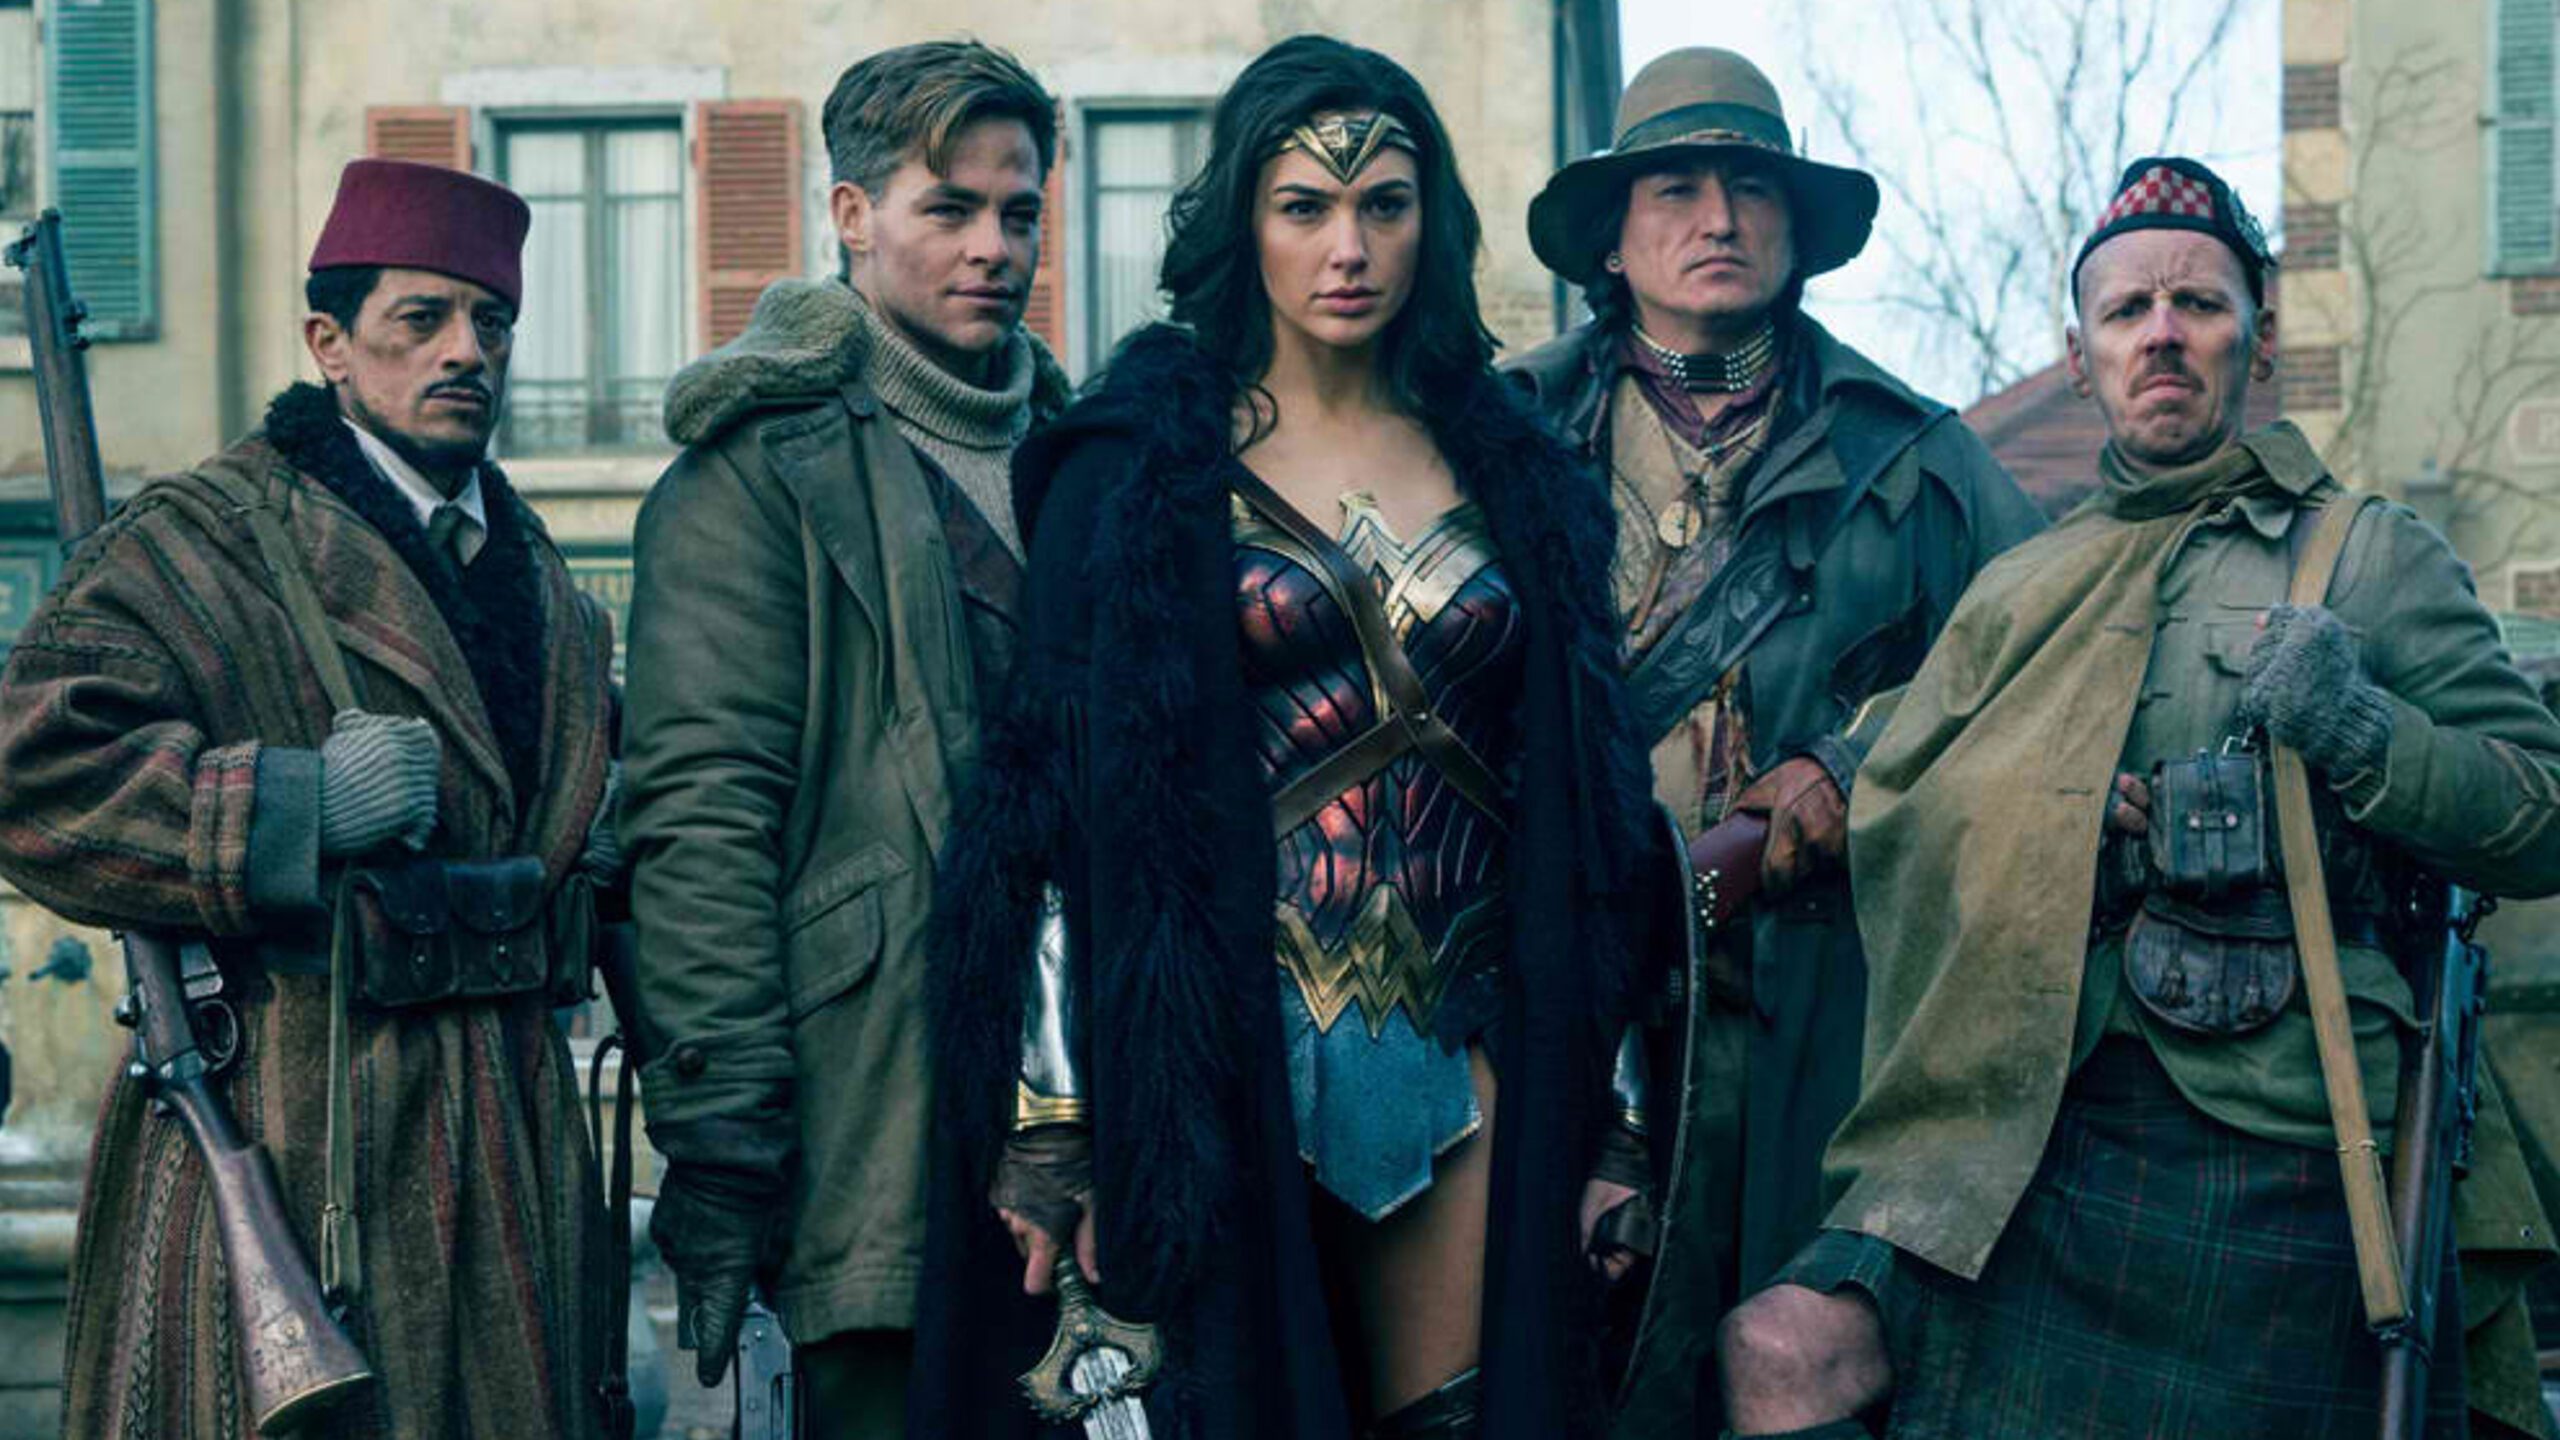 Movie reviews: What critics are saying about ‘Wonder Woman’